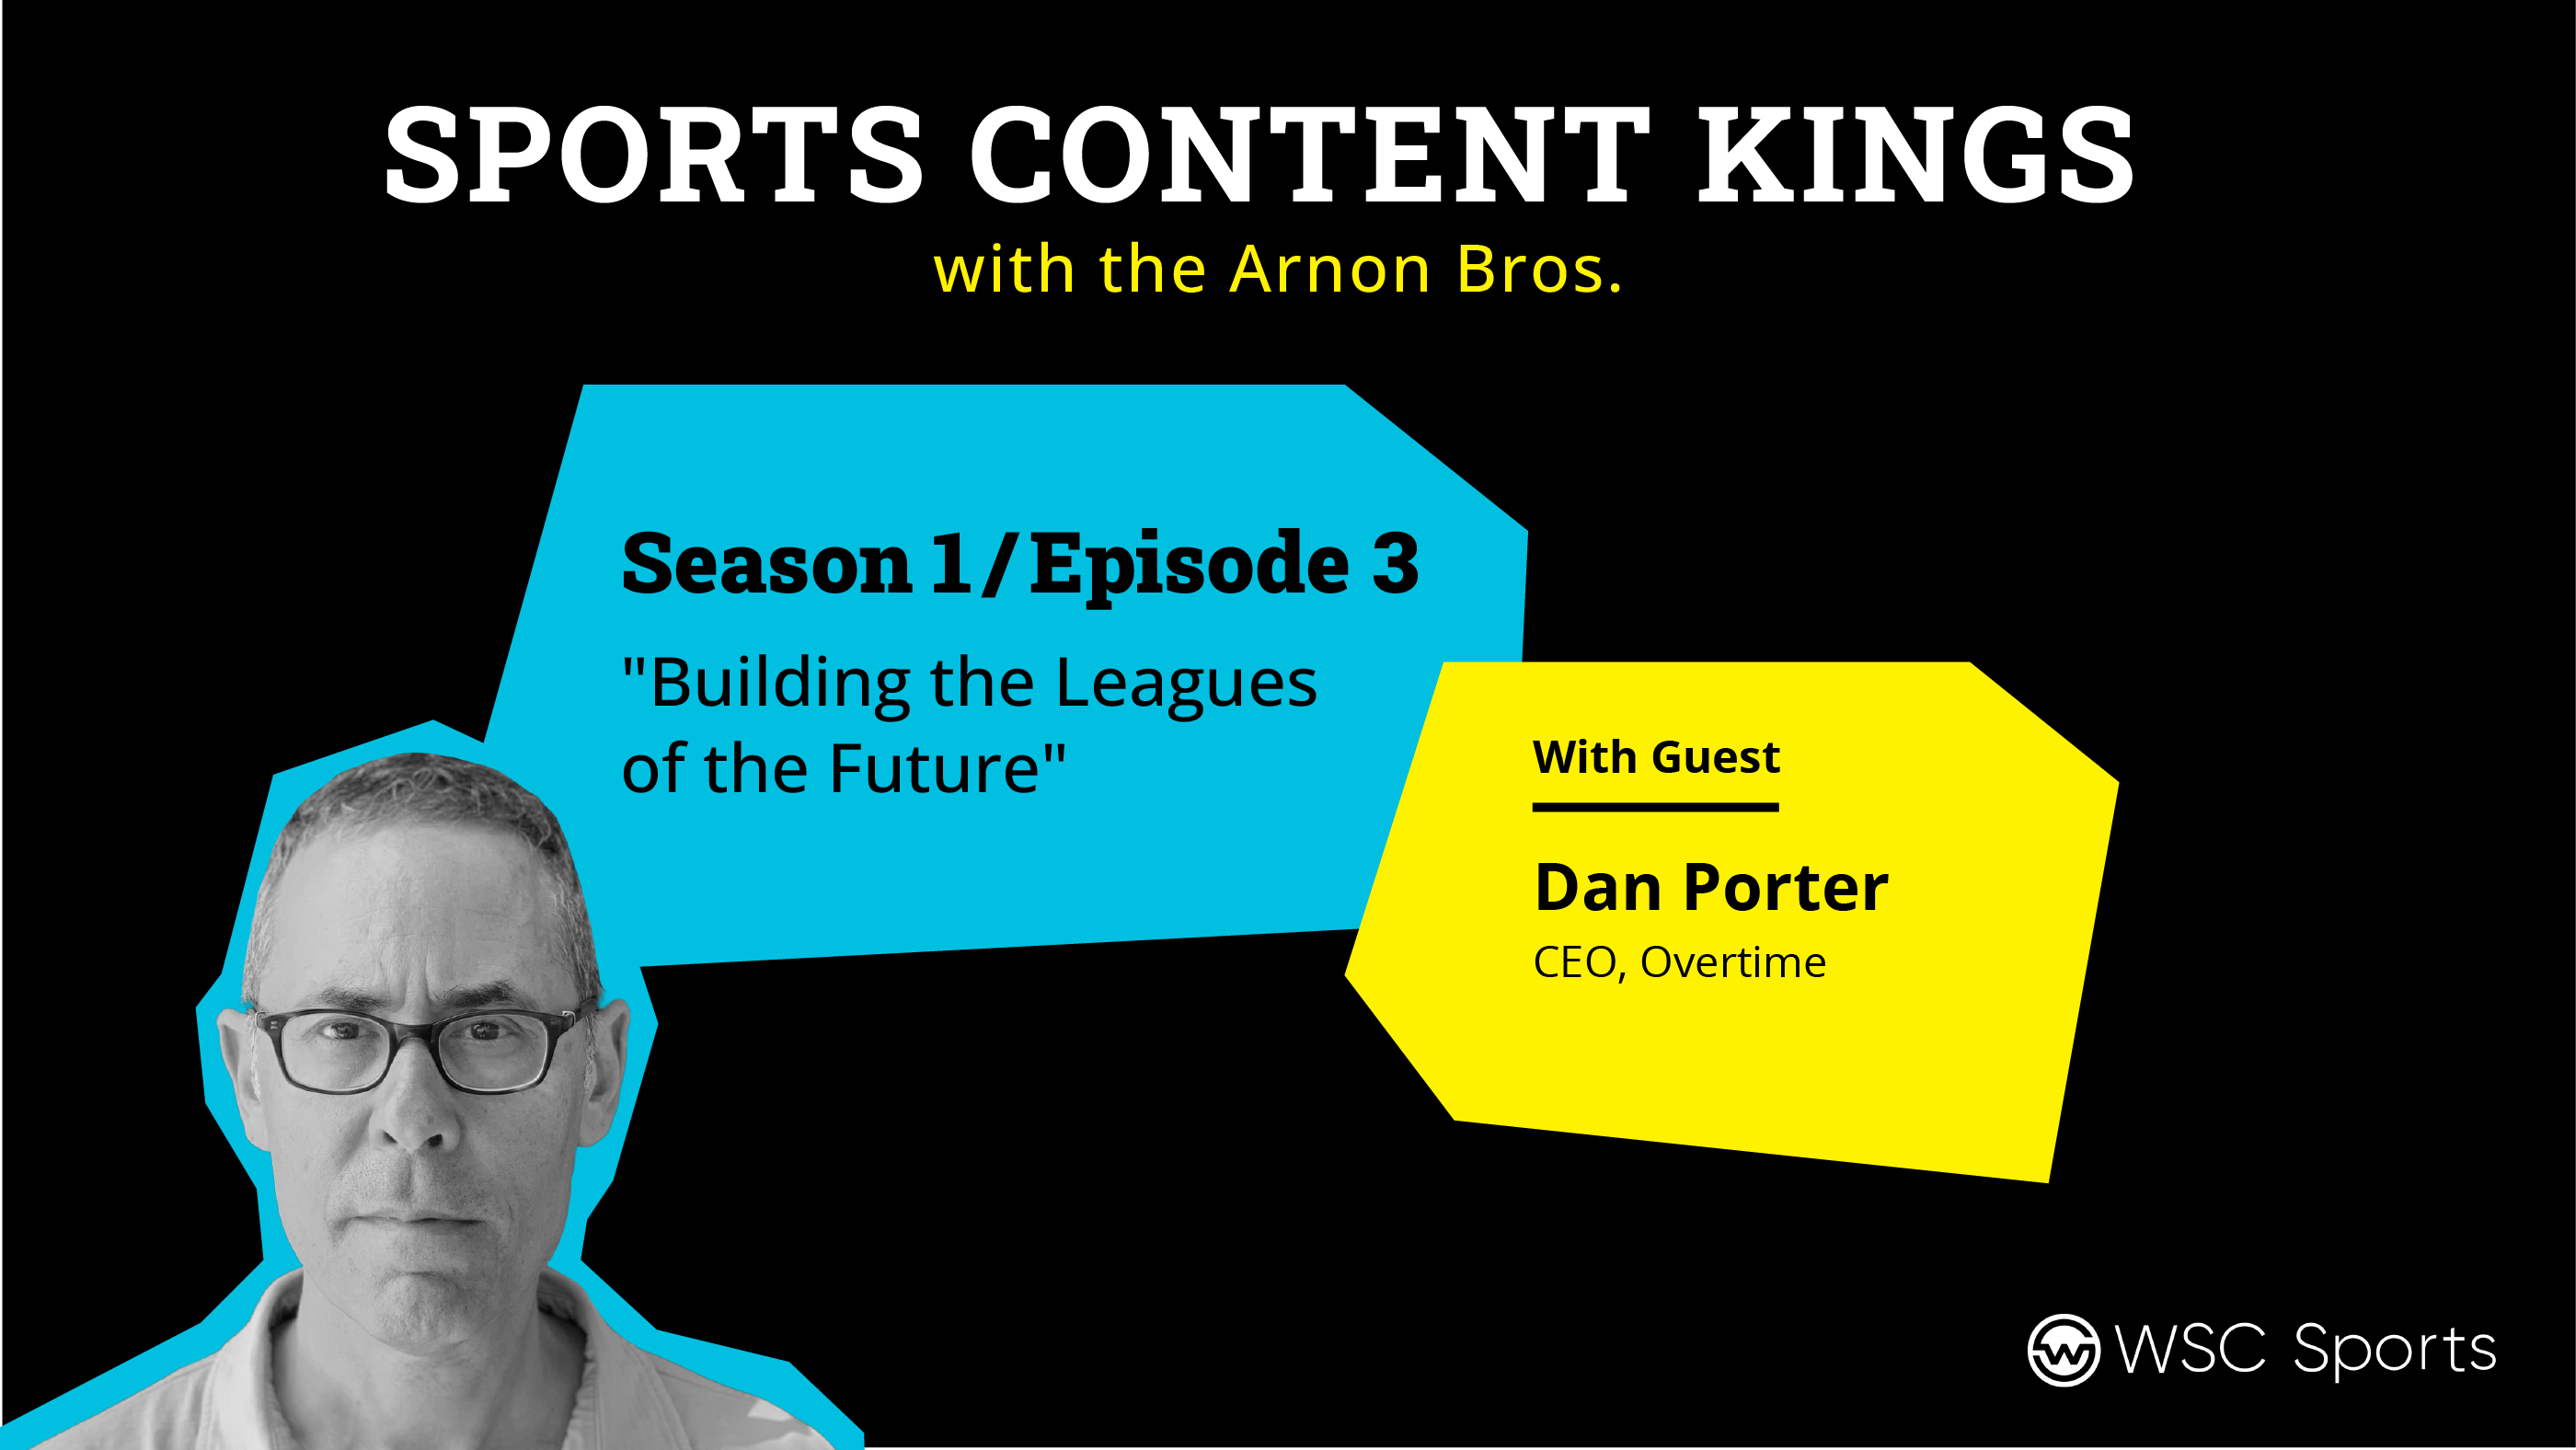 Image of Dan Porter, CEO and Co-founder of OVertime, set against backdrop of Season 1 Episode 3 title of Sports Podcast Kings.